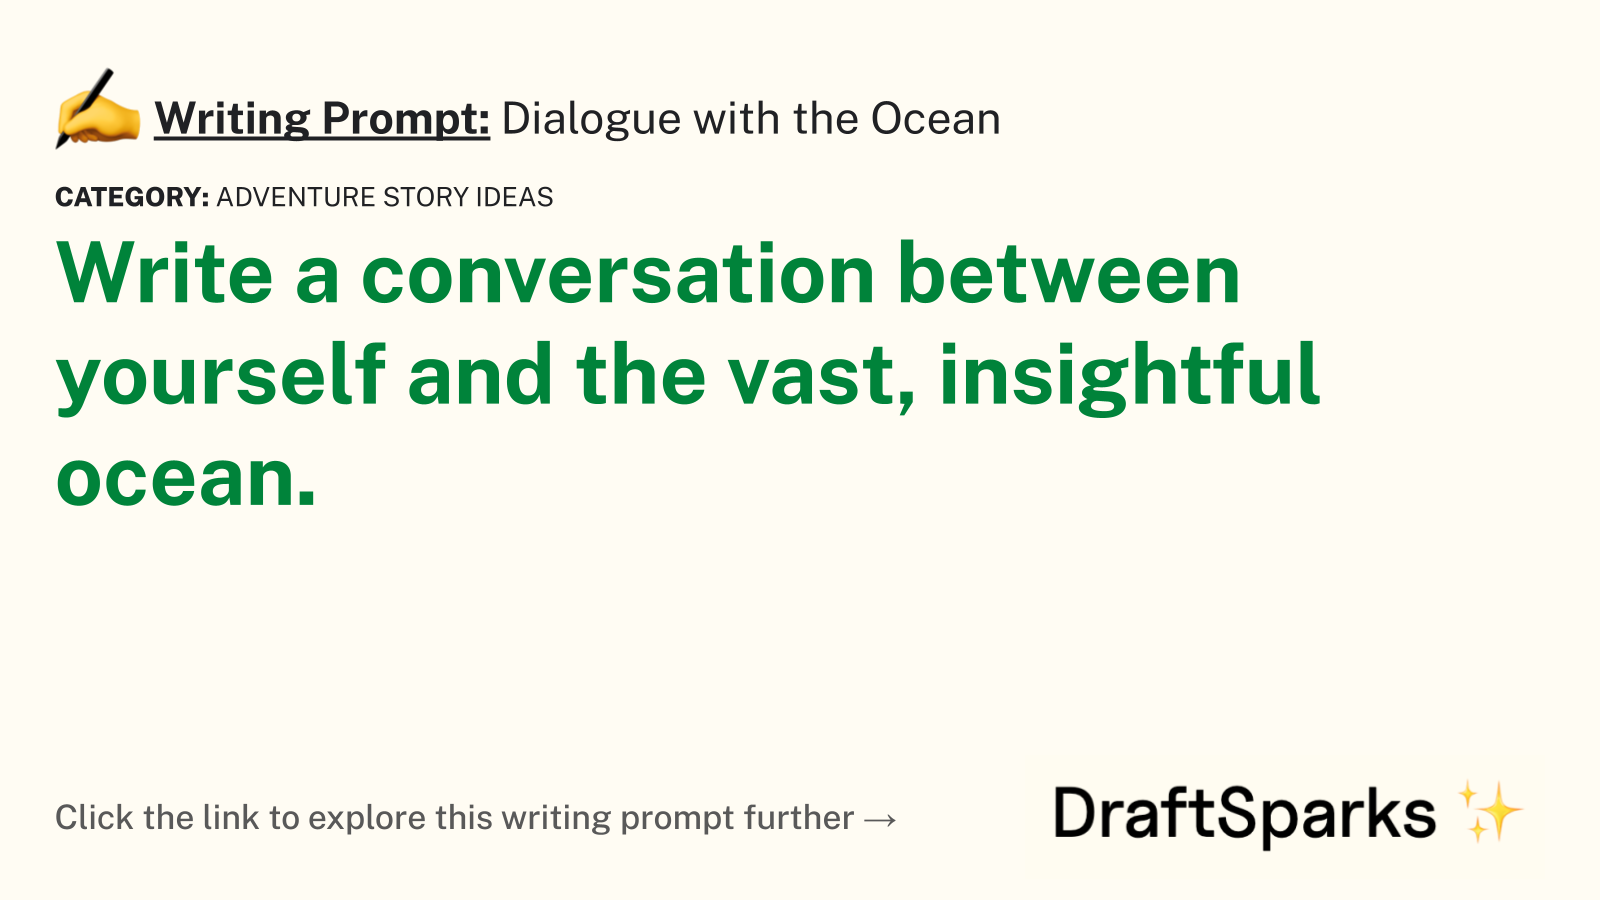 Dialogue with the Ocean